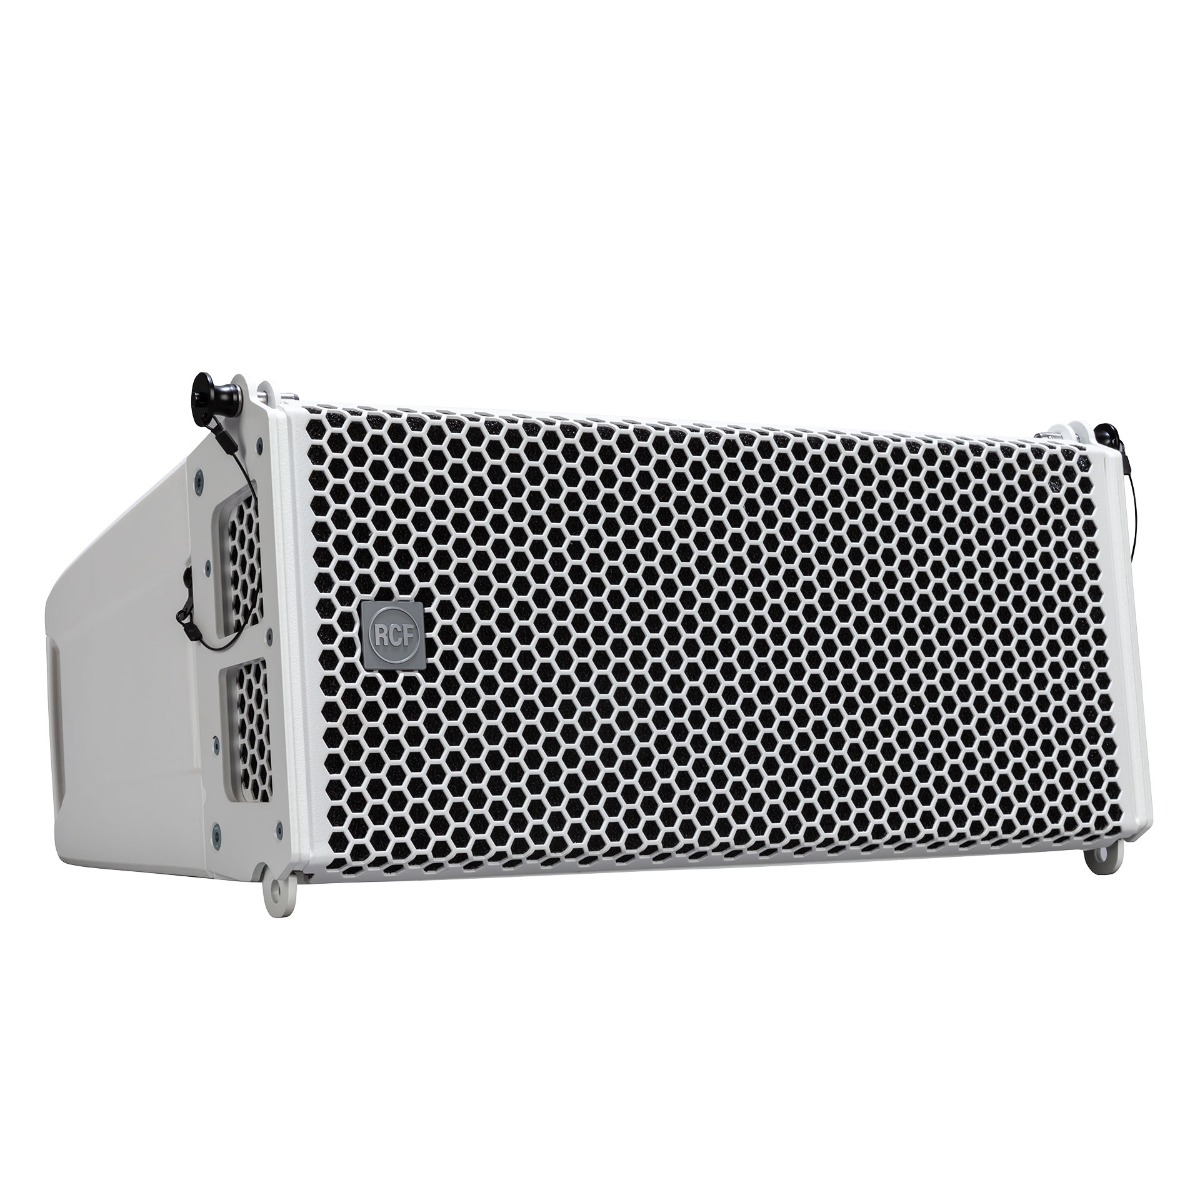 RCF HDL 26-A - Powered 2-Way Line Array Module